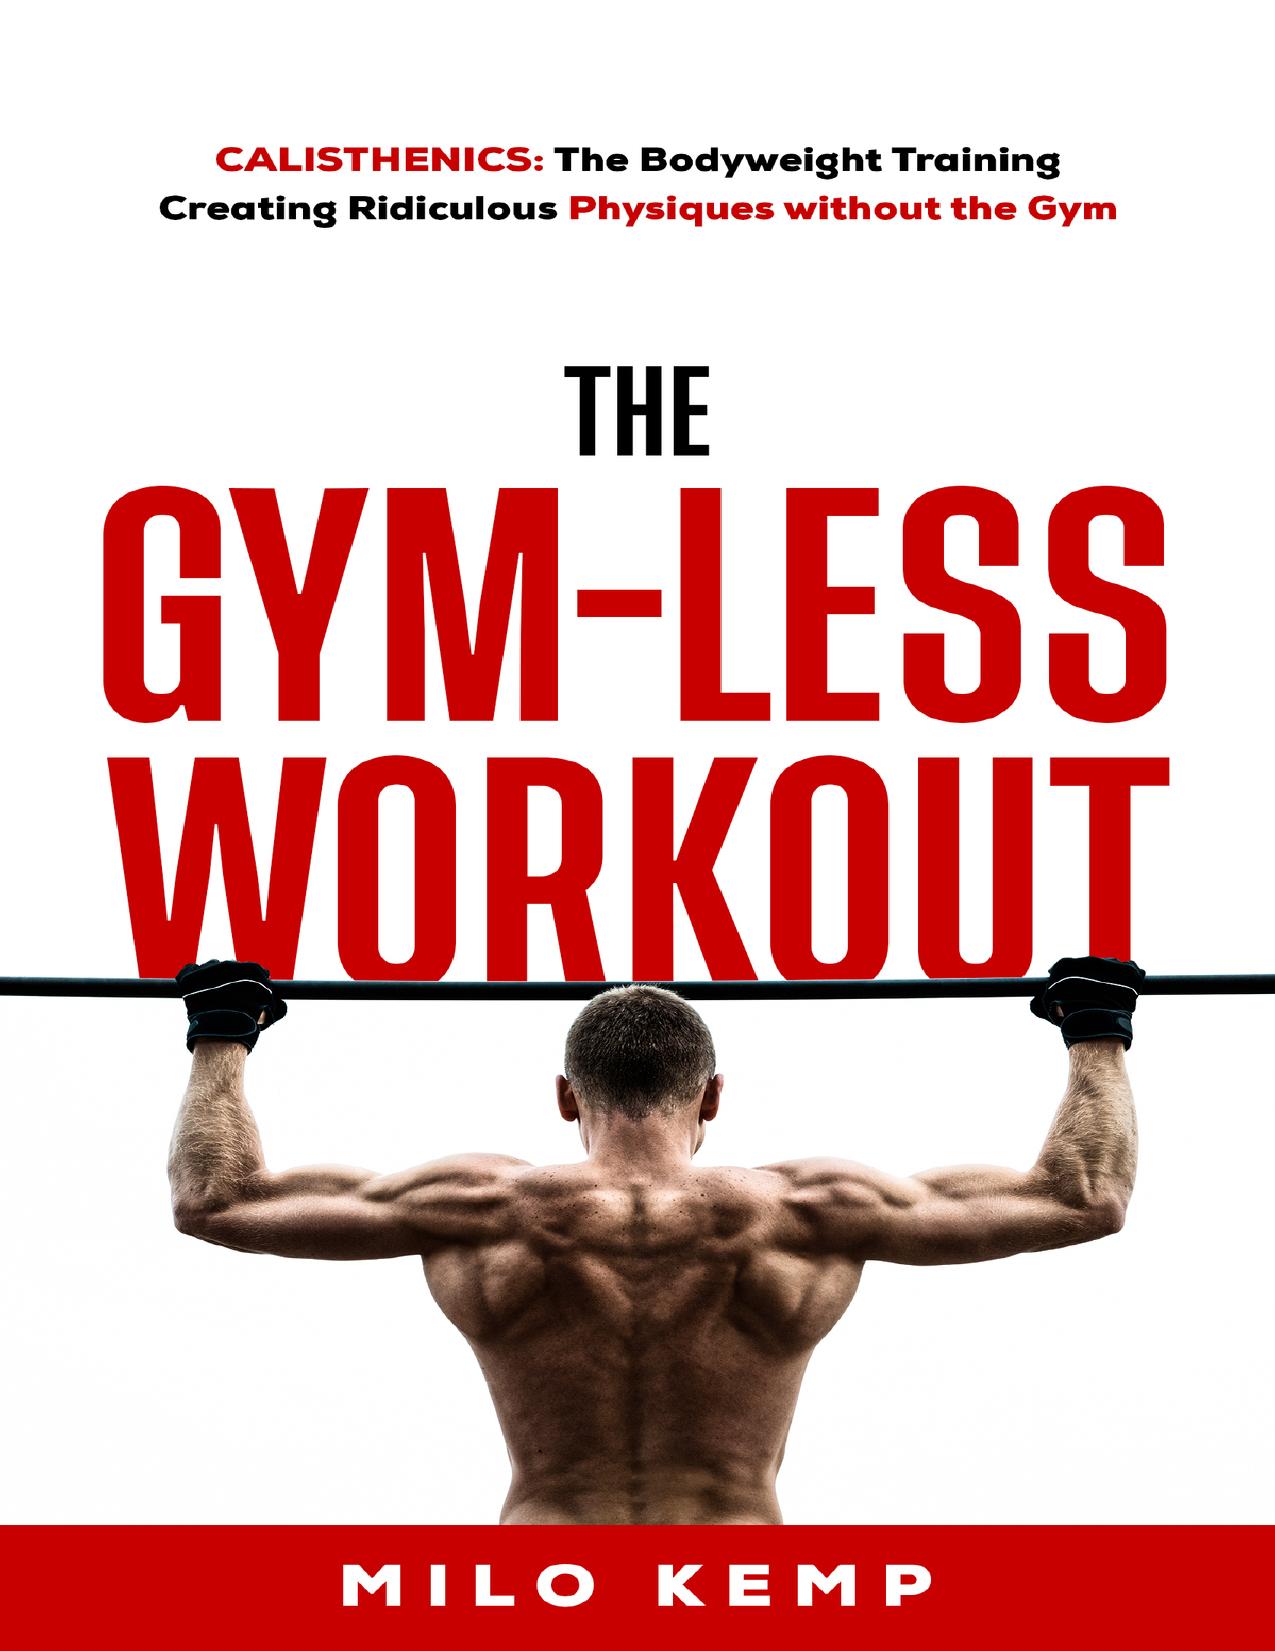 The Gym-Less Workout: Calisthenics: Bodyweight training creating ridiculous physiques without the gym by Kemp Milo